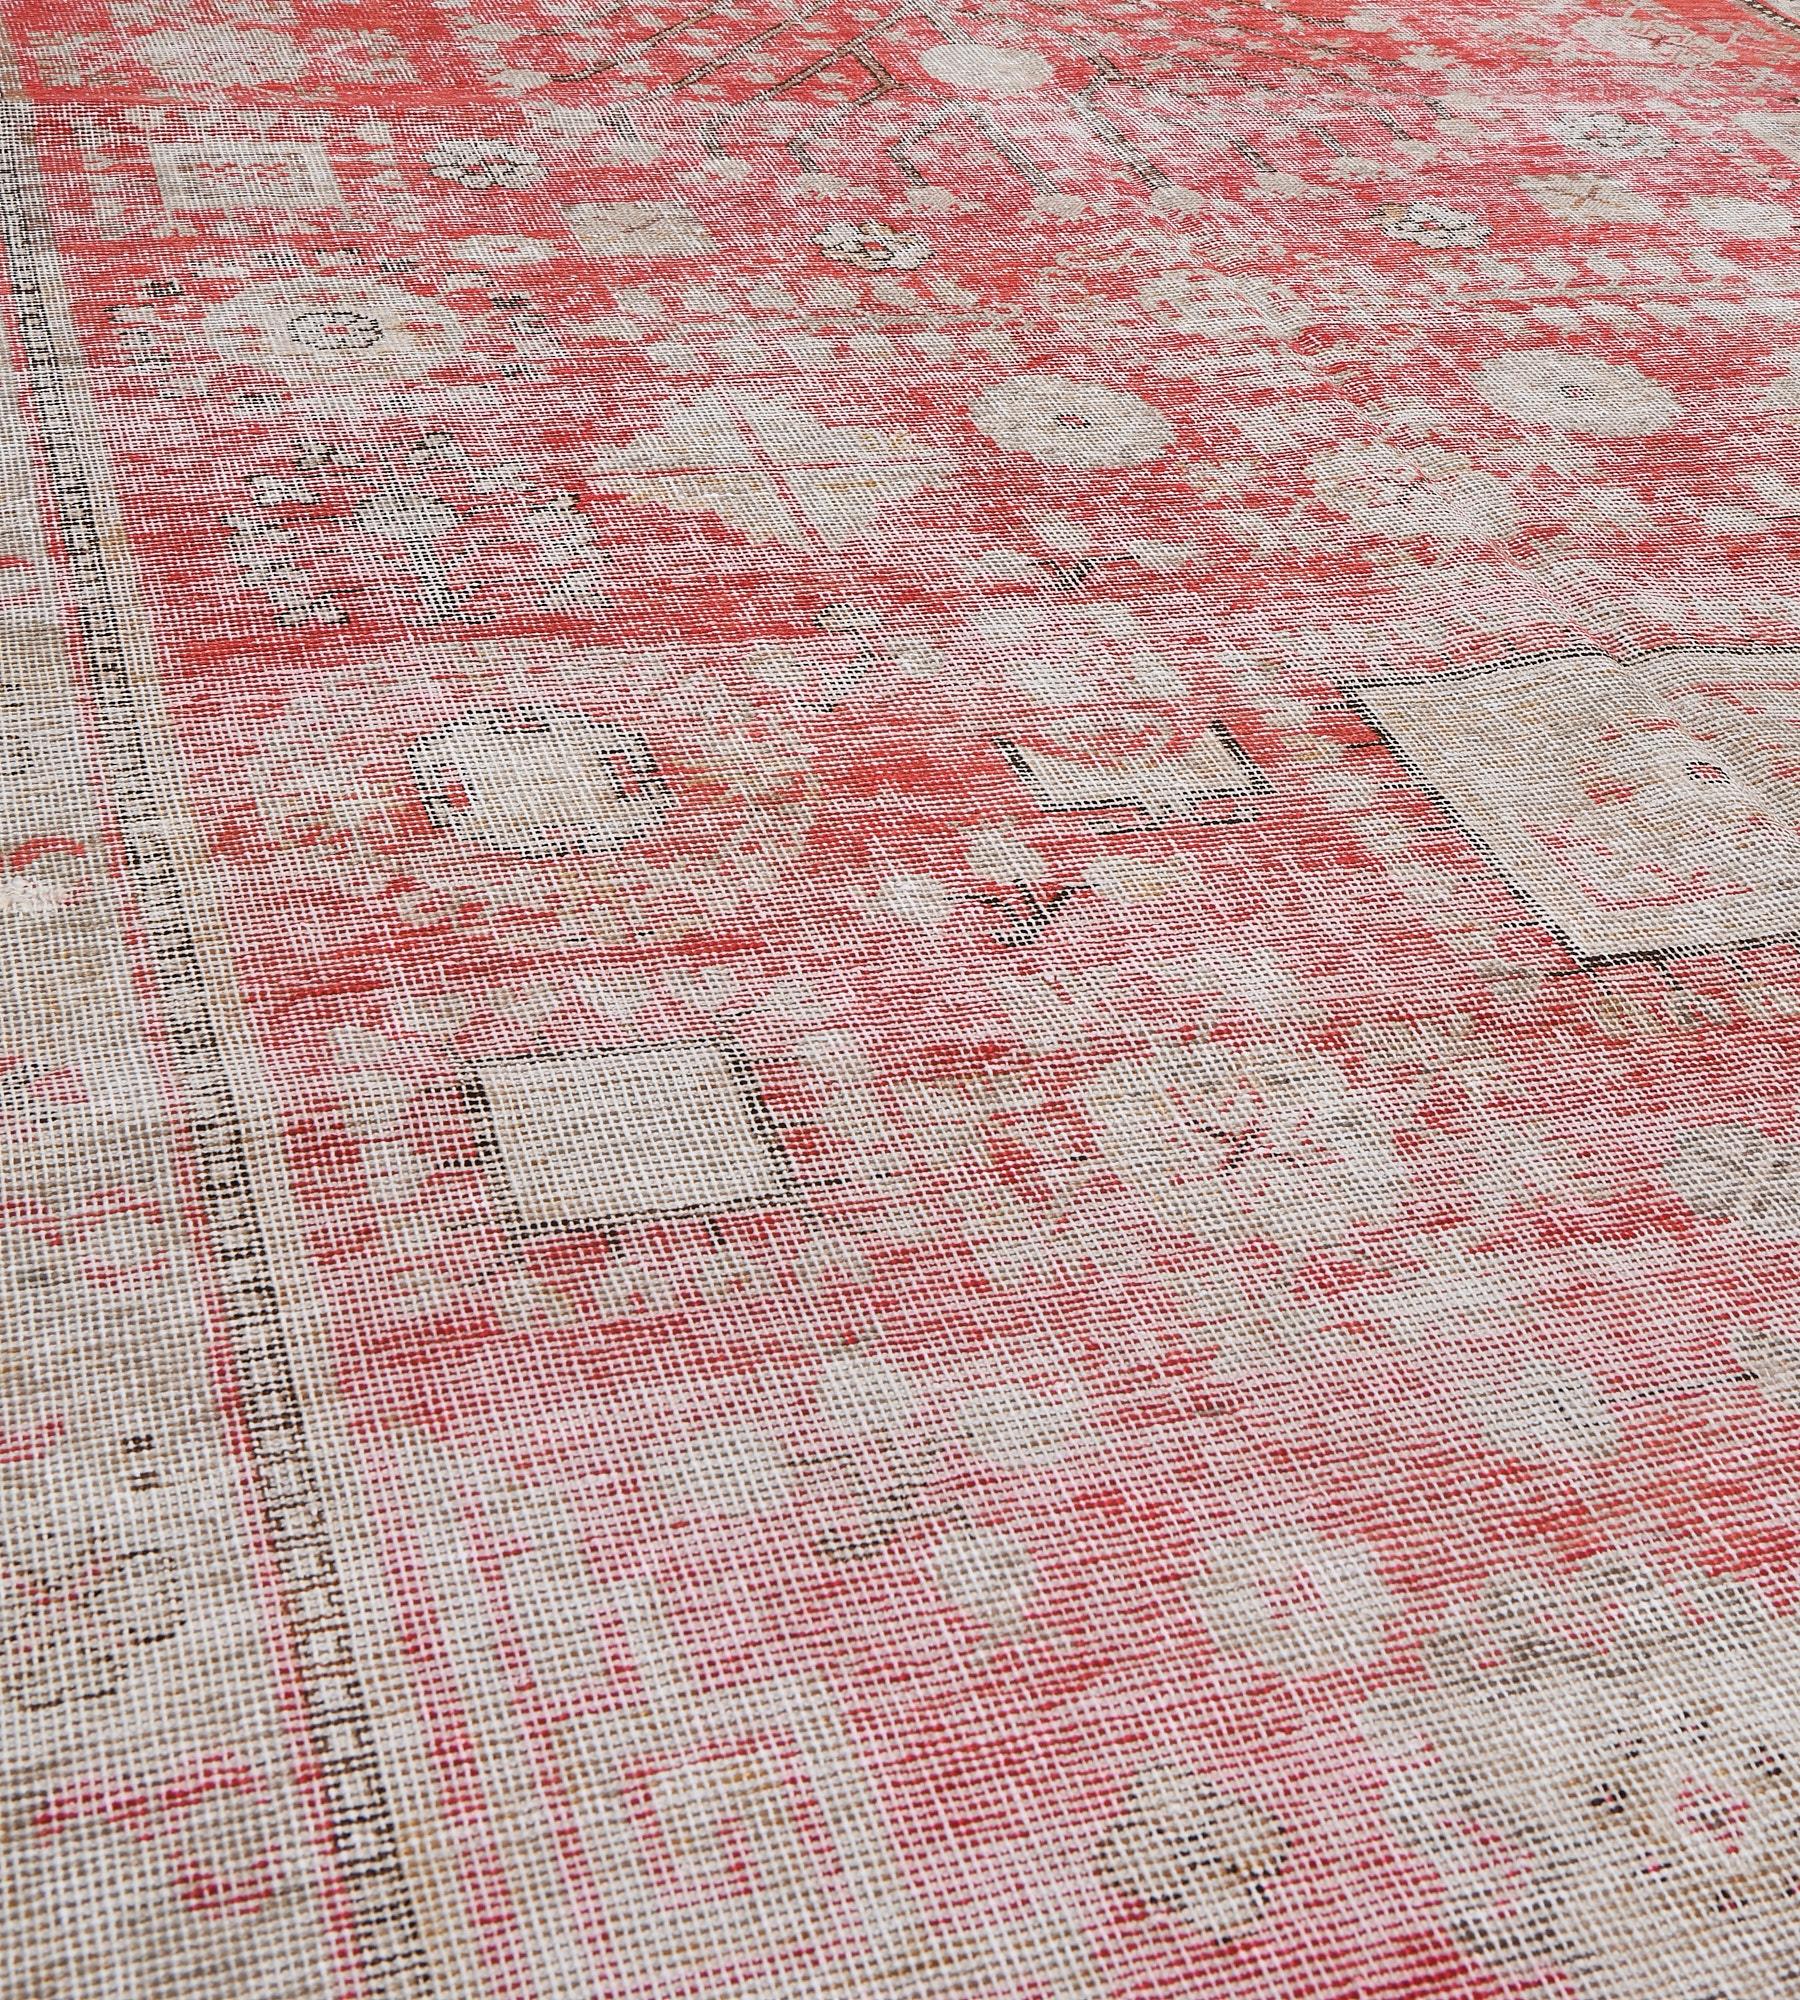 This traditional hand-woven Samarkand Khotan rug has a shaded rust red field of muted floral and geometric motif, with central pomegranate plant, in elegant tonal geometric borders